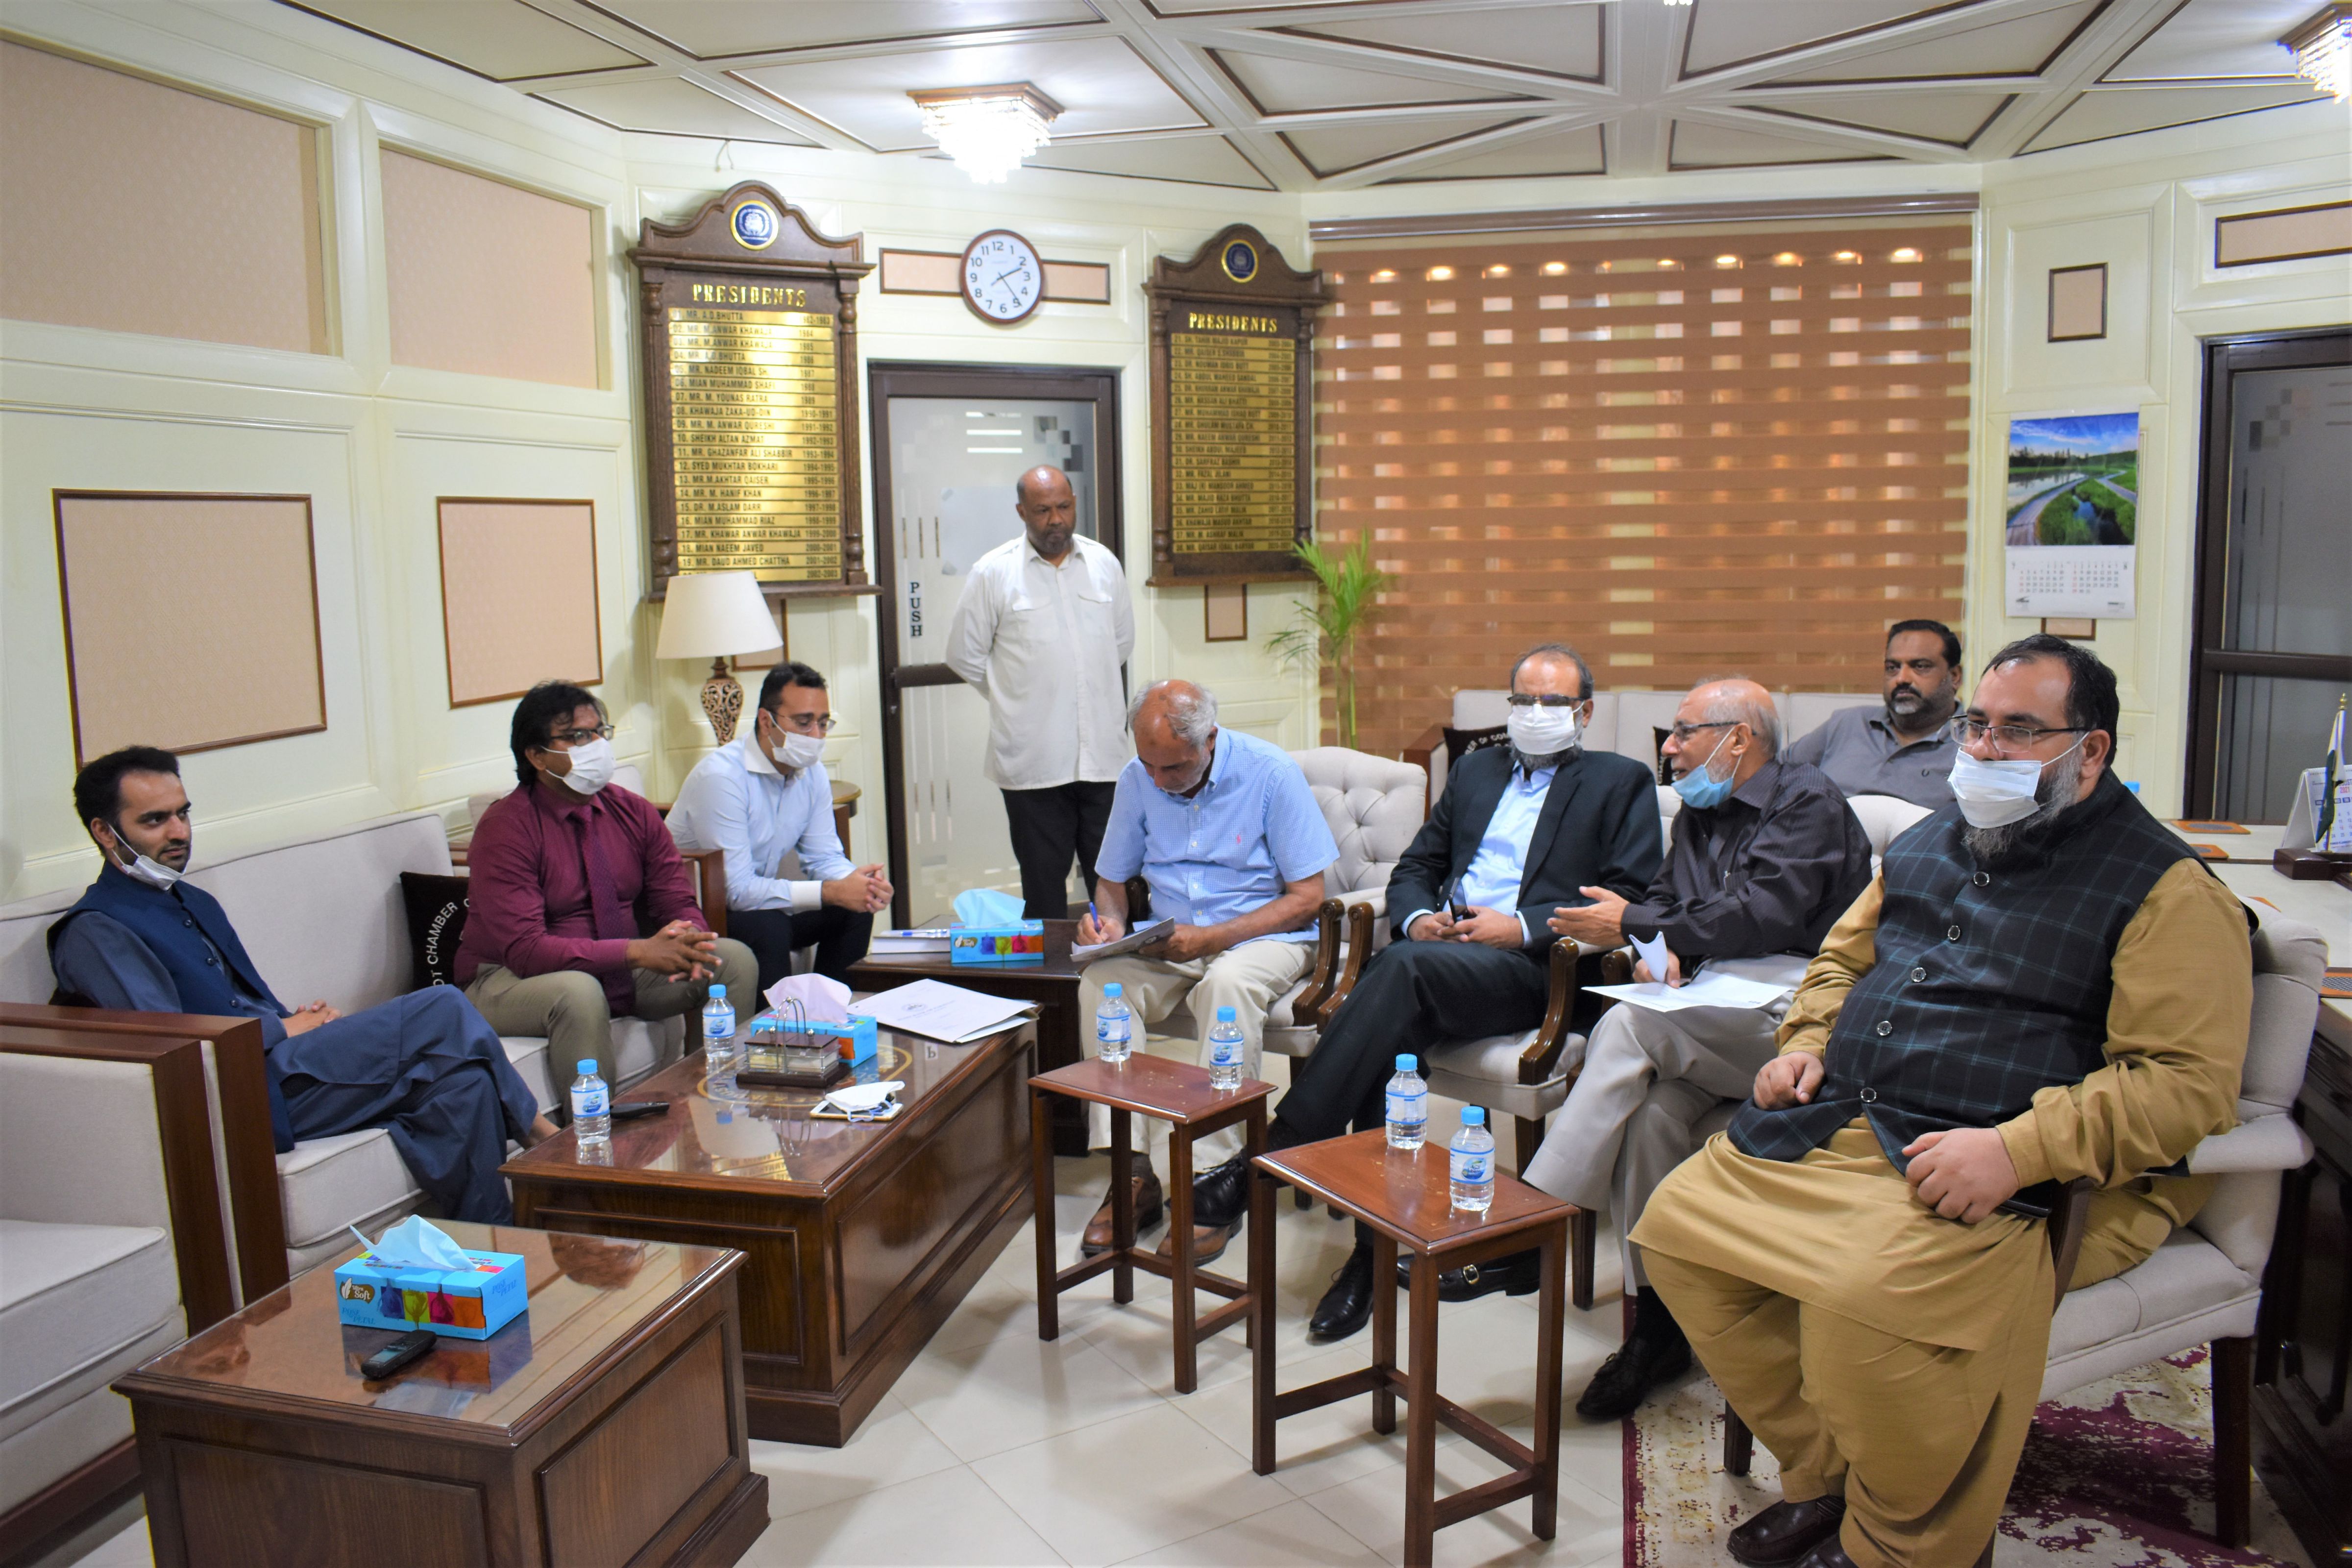 On August 05, 2021, A Delegation of State Bank of Pakistan led by Mr. Saqib Jamal Qureshi, Senior Deputy Chief Manager, BSC, SBP Sialkot visited Sialkot Chamber of Commerce & Industry and had a meeting with Mr. Khuram Aslam, Senior Vice President, SCCI to brief about Sector of the year initiative “Renewable Energy” of SBP.   The Delegation also comprised Mr. Muhammad Nauman Nadeem, Assistant Chief Manager, Mr. Ali Raza Shahid, Senior Officer and Mr. Safian Taseer, Senior Officer, SBP BSC Sialkot.    Mr. M Nauman Nadeem presented the details of the scheme and had Q/A session.   Mr. Shafiq ur Rehman, Chairman, SCCI Departmental Committee on Banking & Finance assured maximum facilitation from SCCI to State Bank of Pakistan in this initiative.